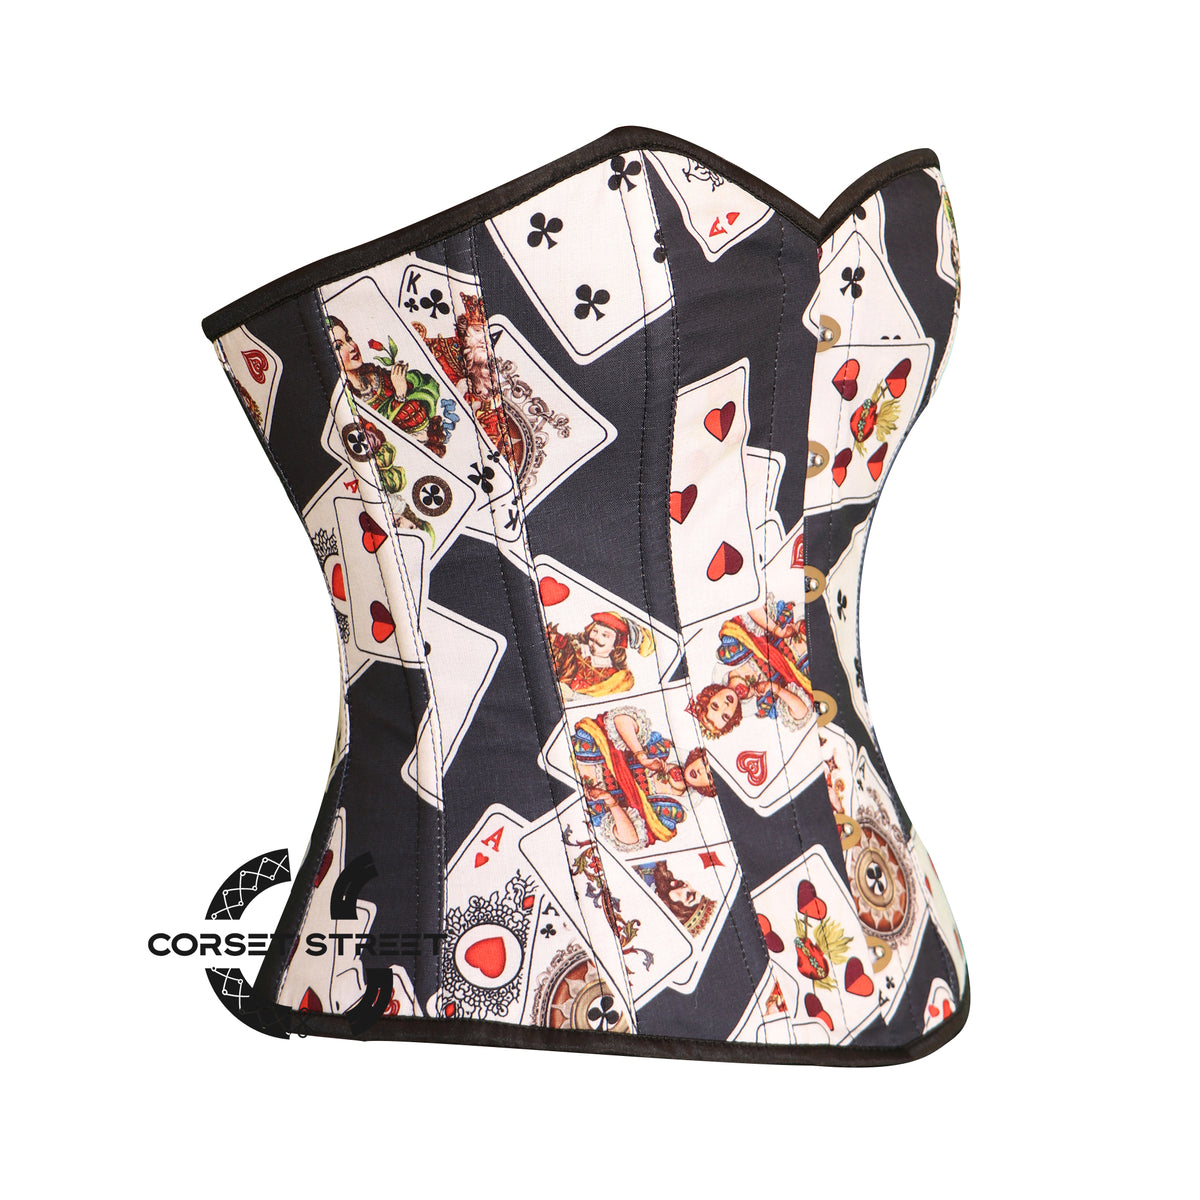 Playing Cards Printed Cotton Corset Gothic Plus Size  Costume Overbust Bustier Top